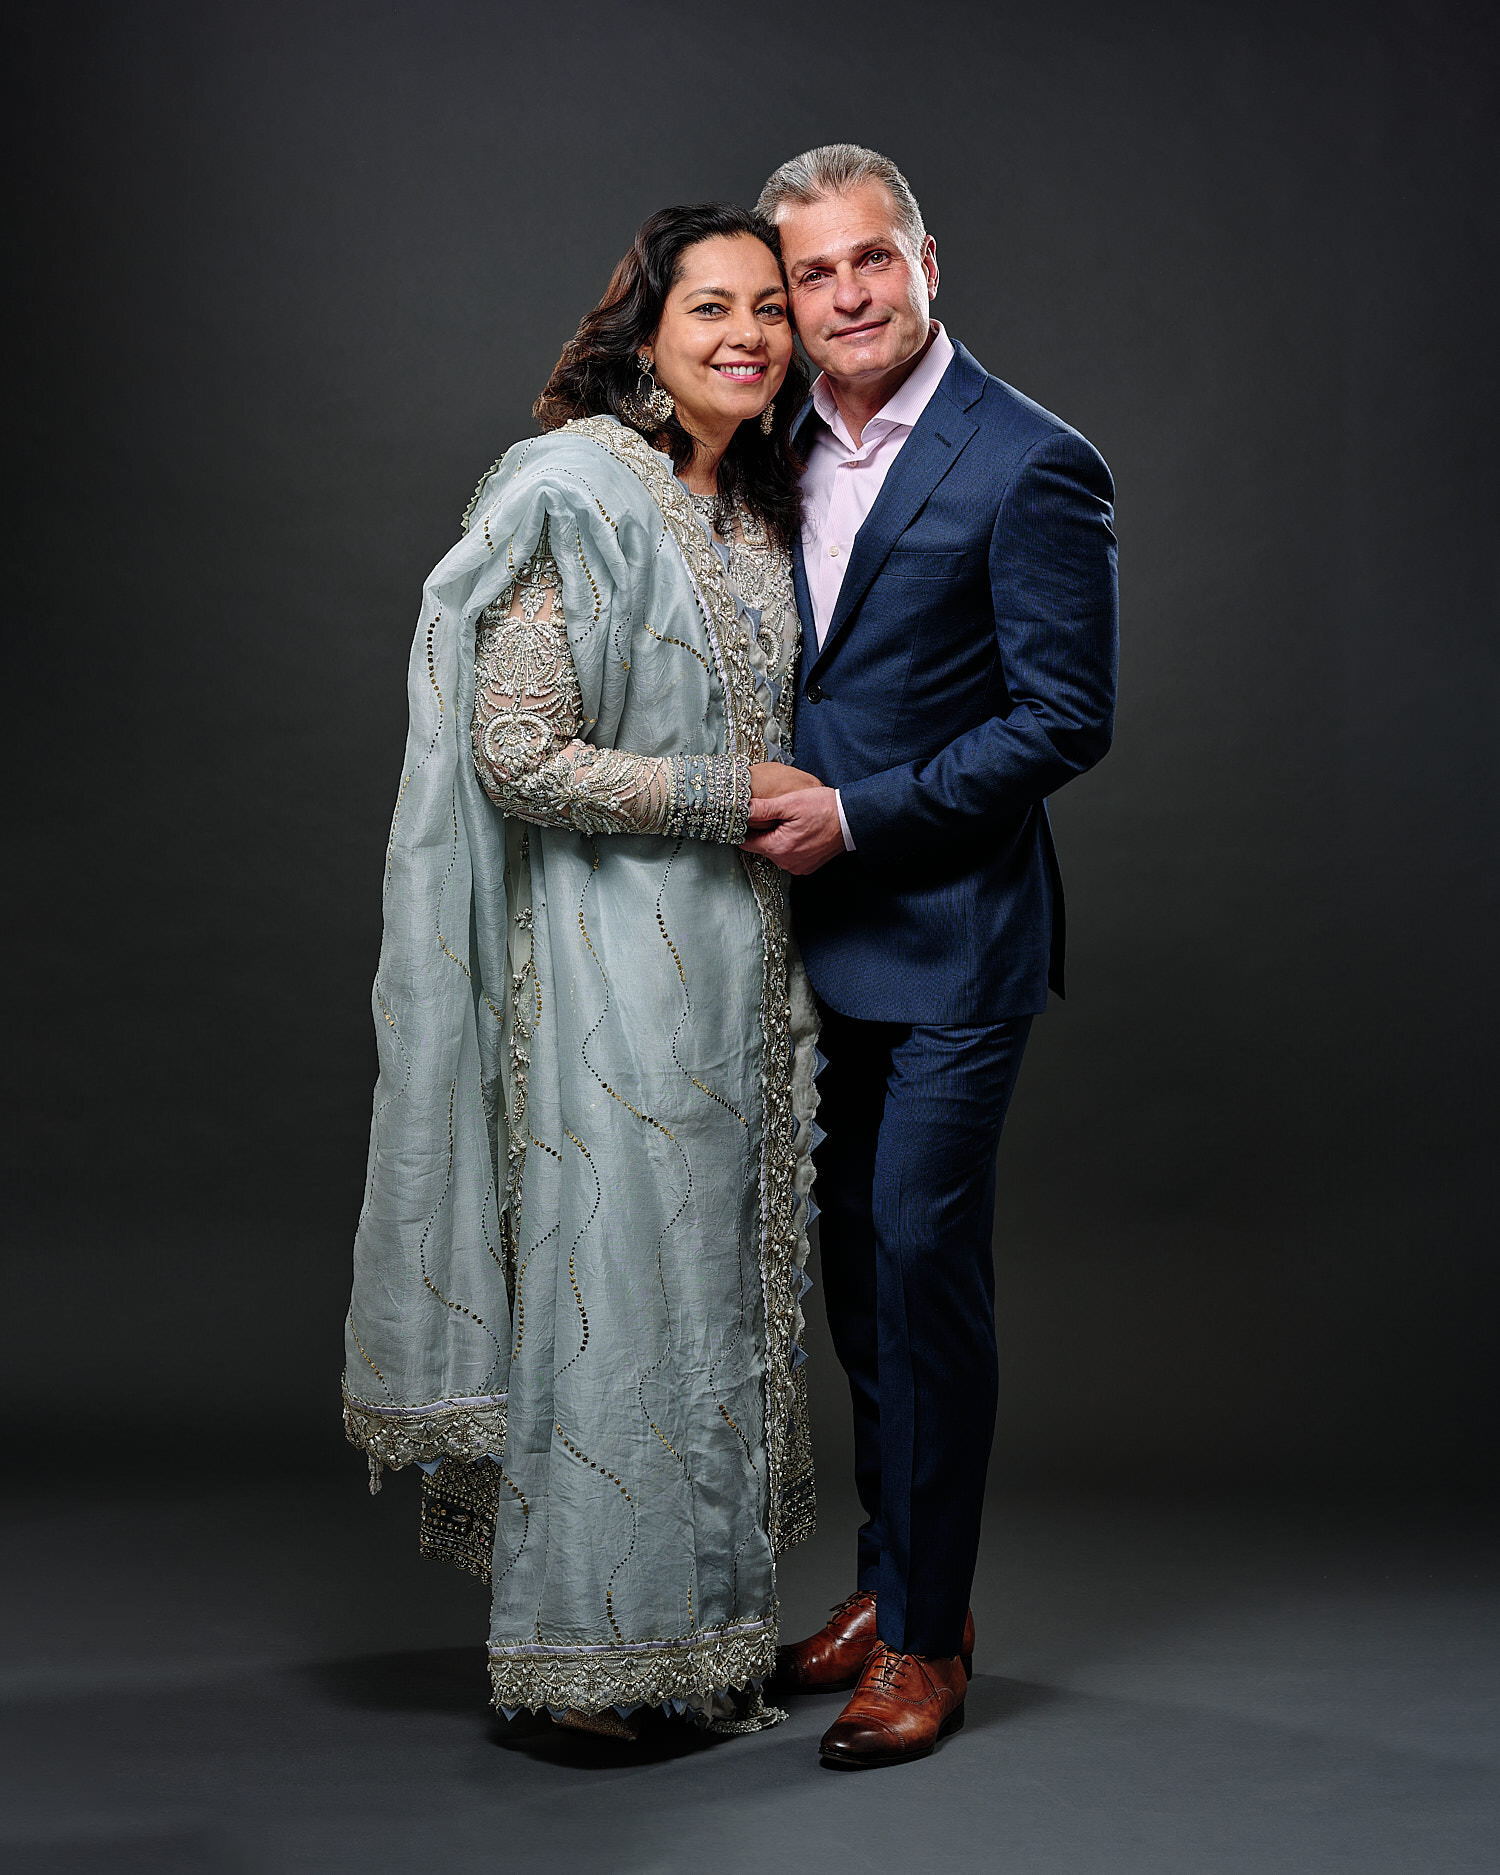  Bushra and Saad are posing for their wedding portraits in a professional photography studio. Bushra is dressed in a stunning pale dress ornamented with pearls, floral motives. Saad wears a blue suit. 